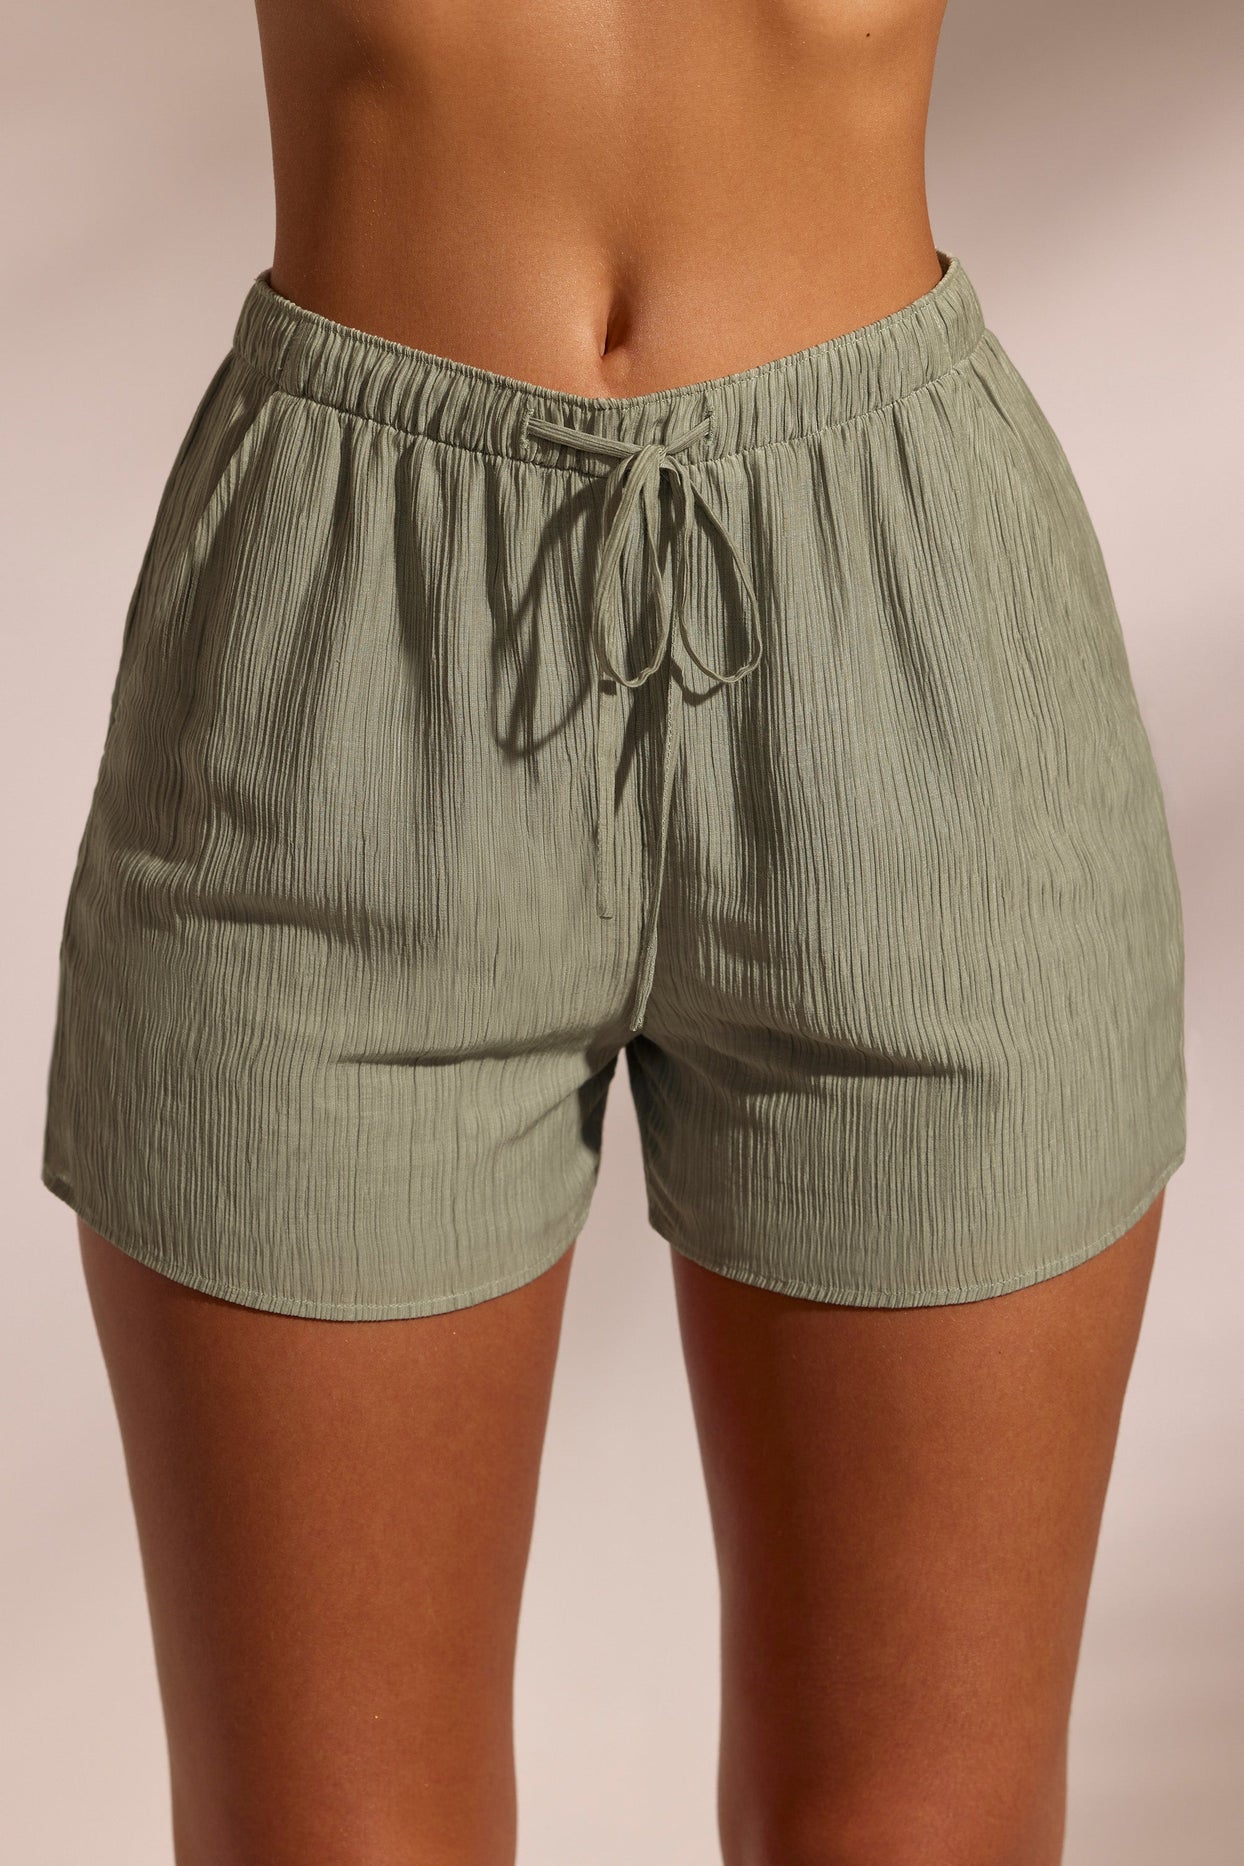 Crinkle Textured Beach Shorts in Light Green